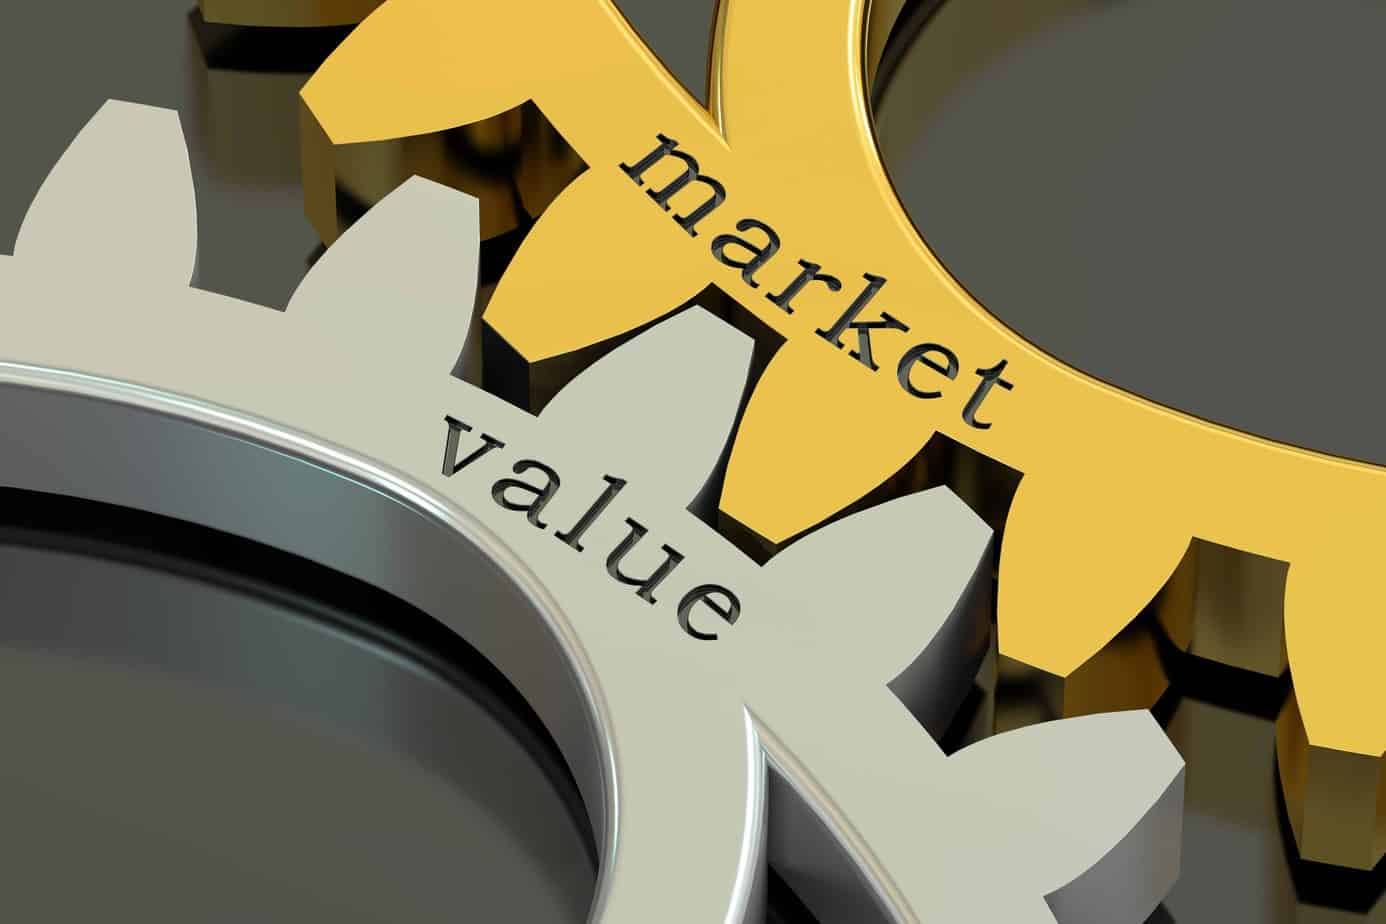 It’s time for a European market for values!